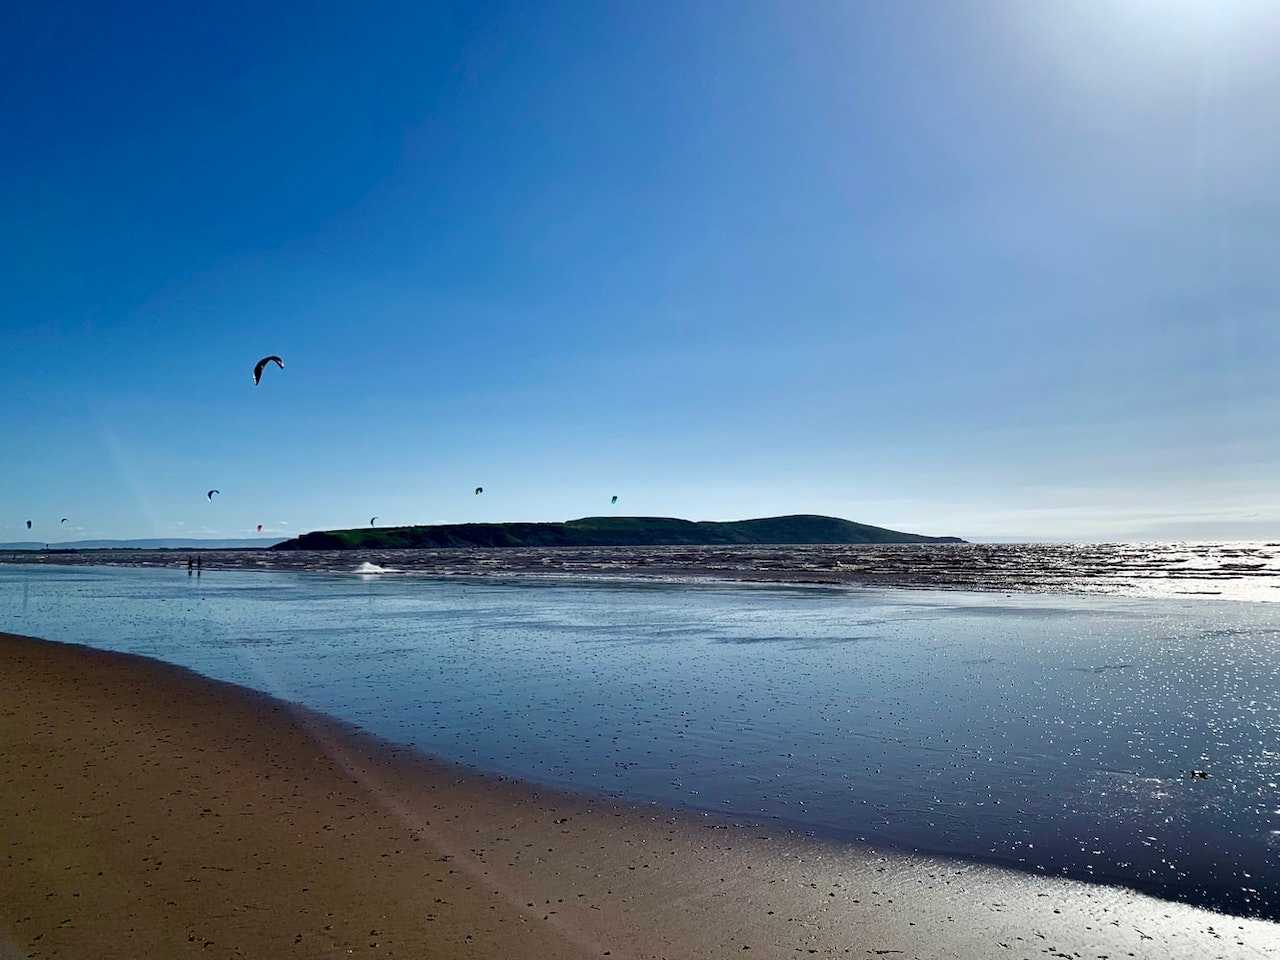 Kitesurfers fly above the water on Weston-super-Mare's beach